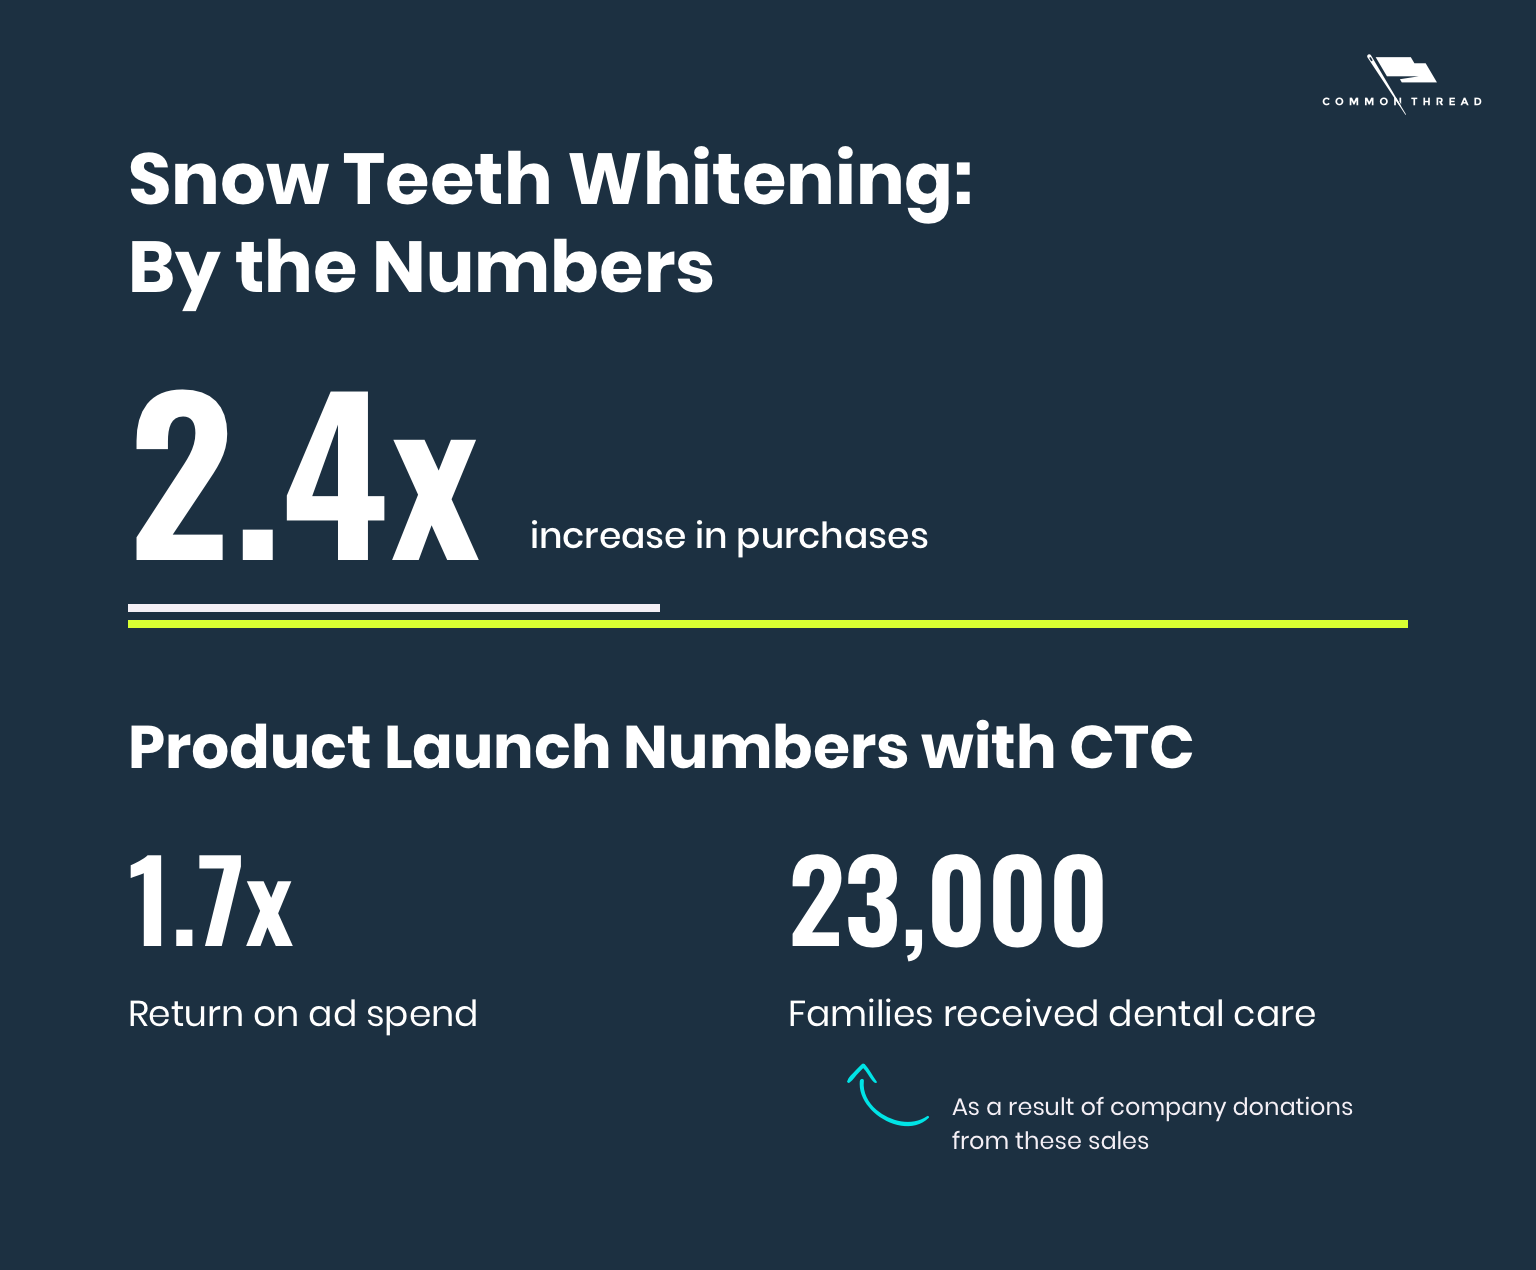 Snow Teetch Whitening by the numbers